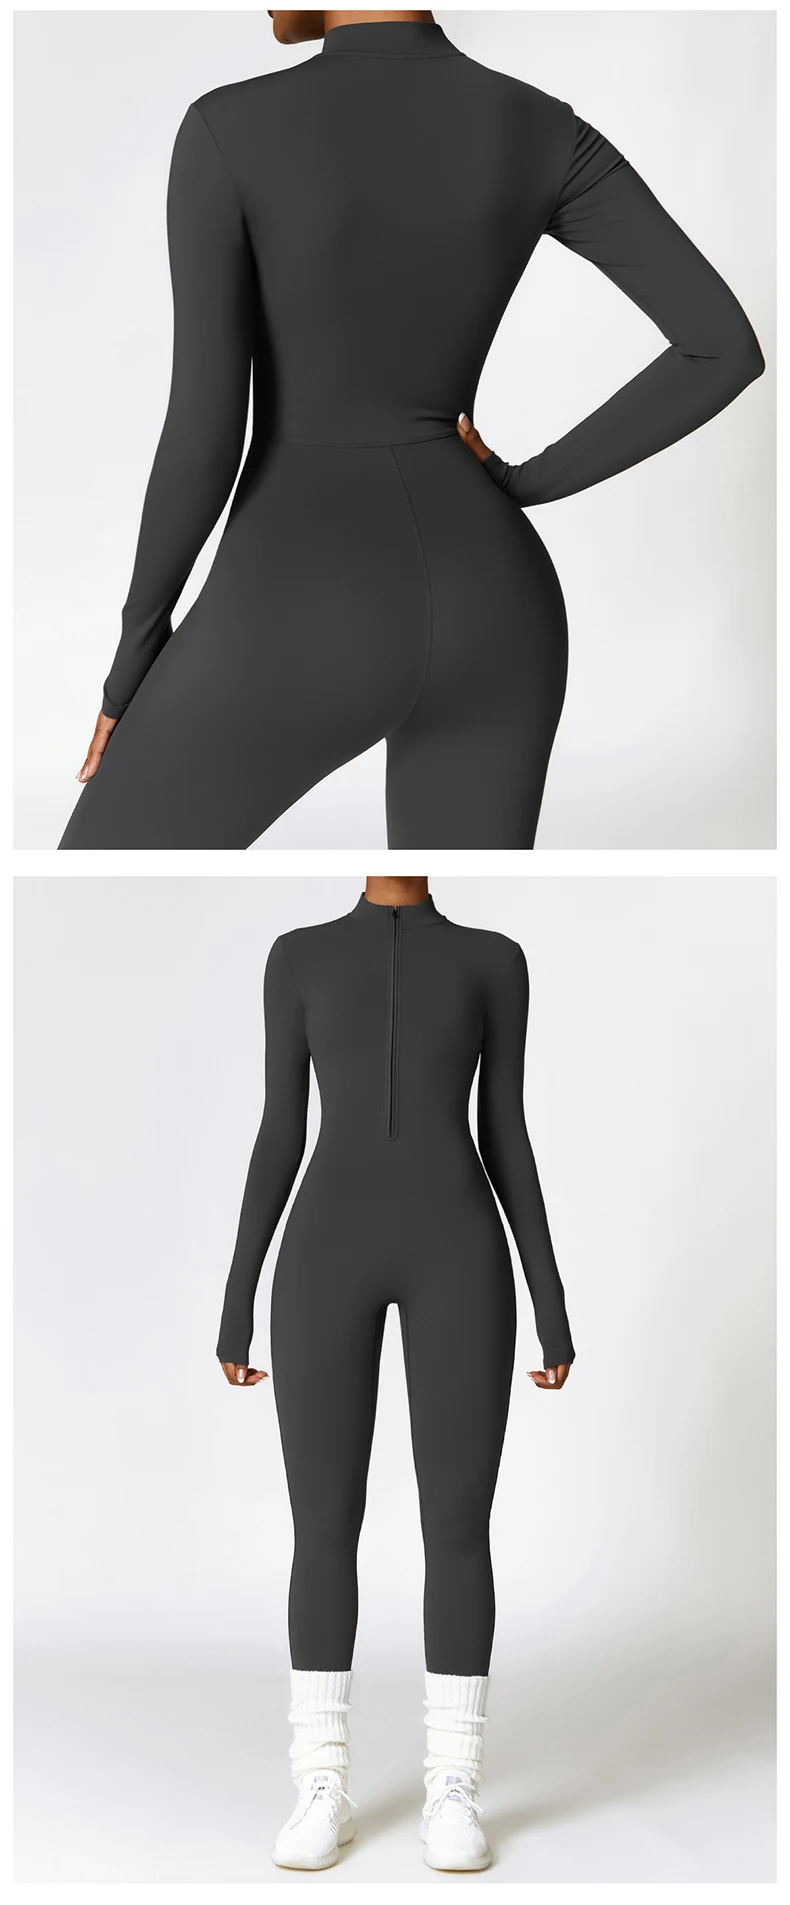 Clt8445 Winter Cashmere One-piece Yoga Tights Long Sleeve Fitness ...